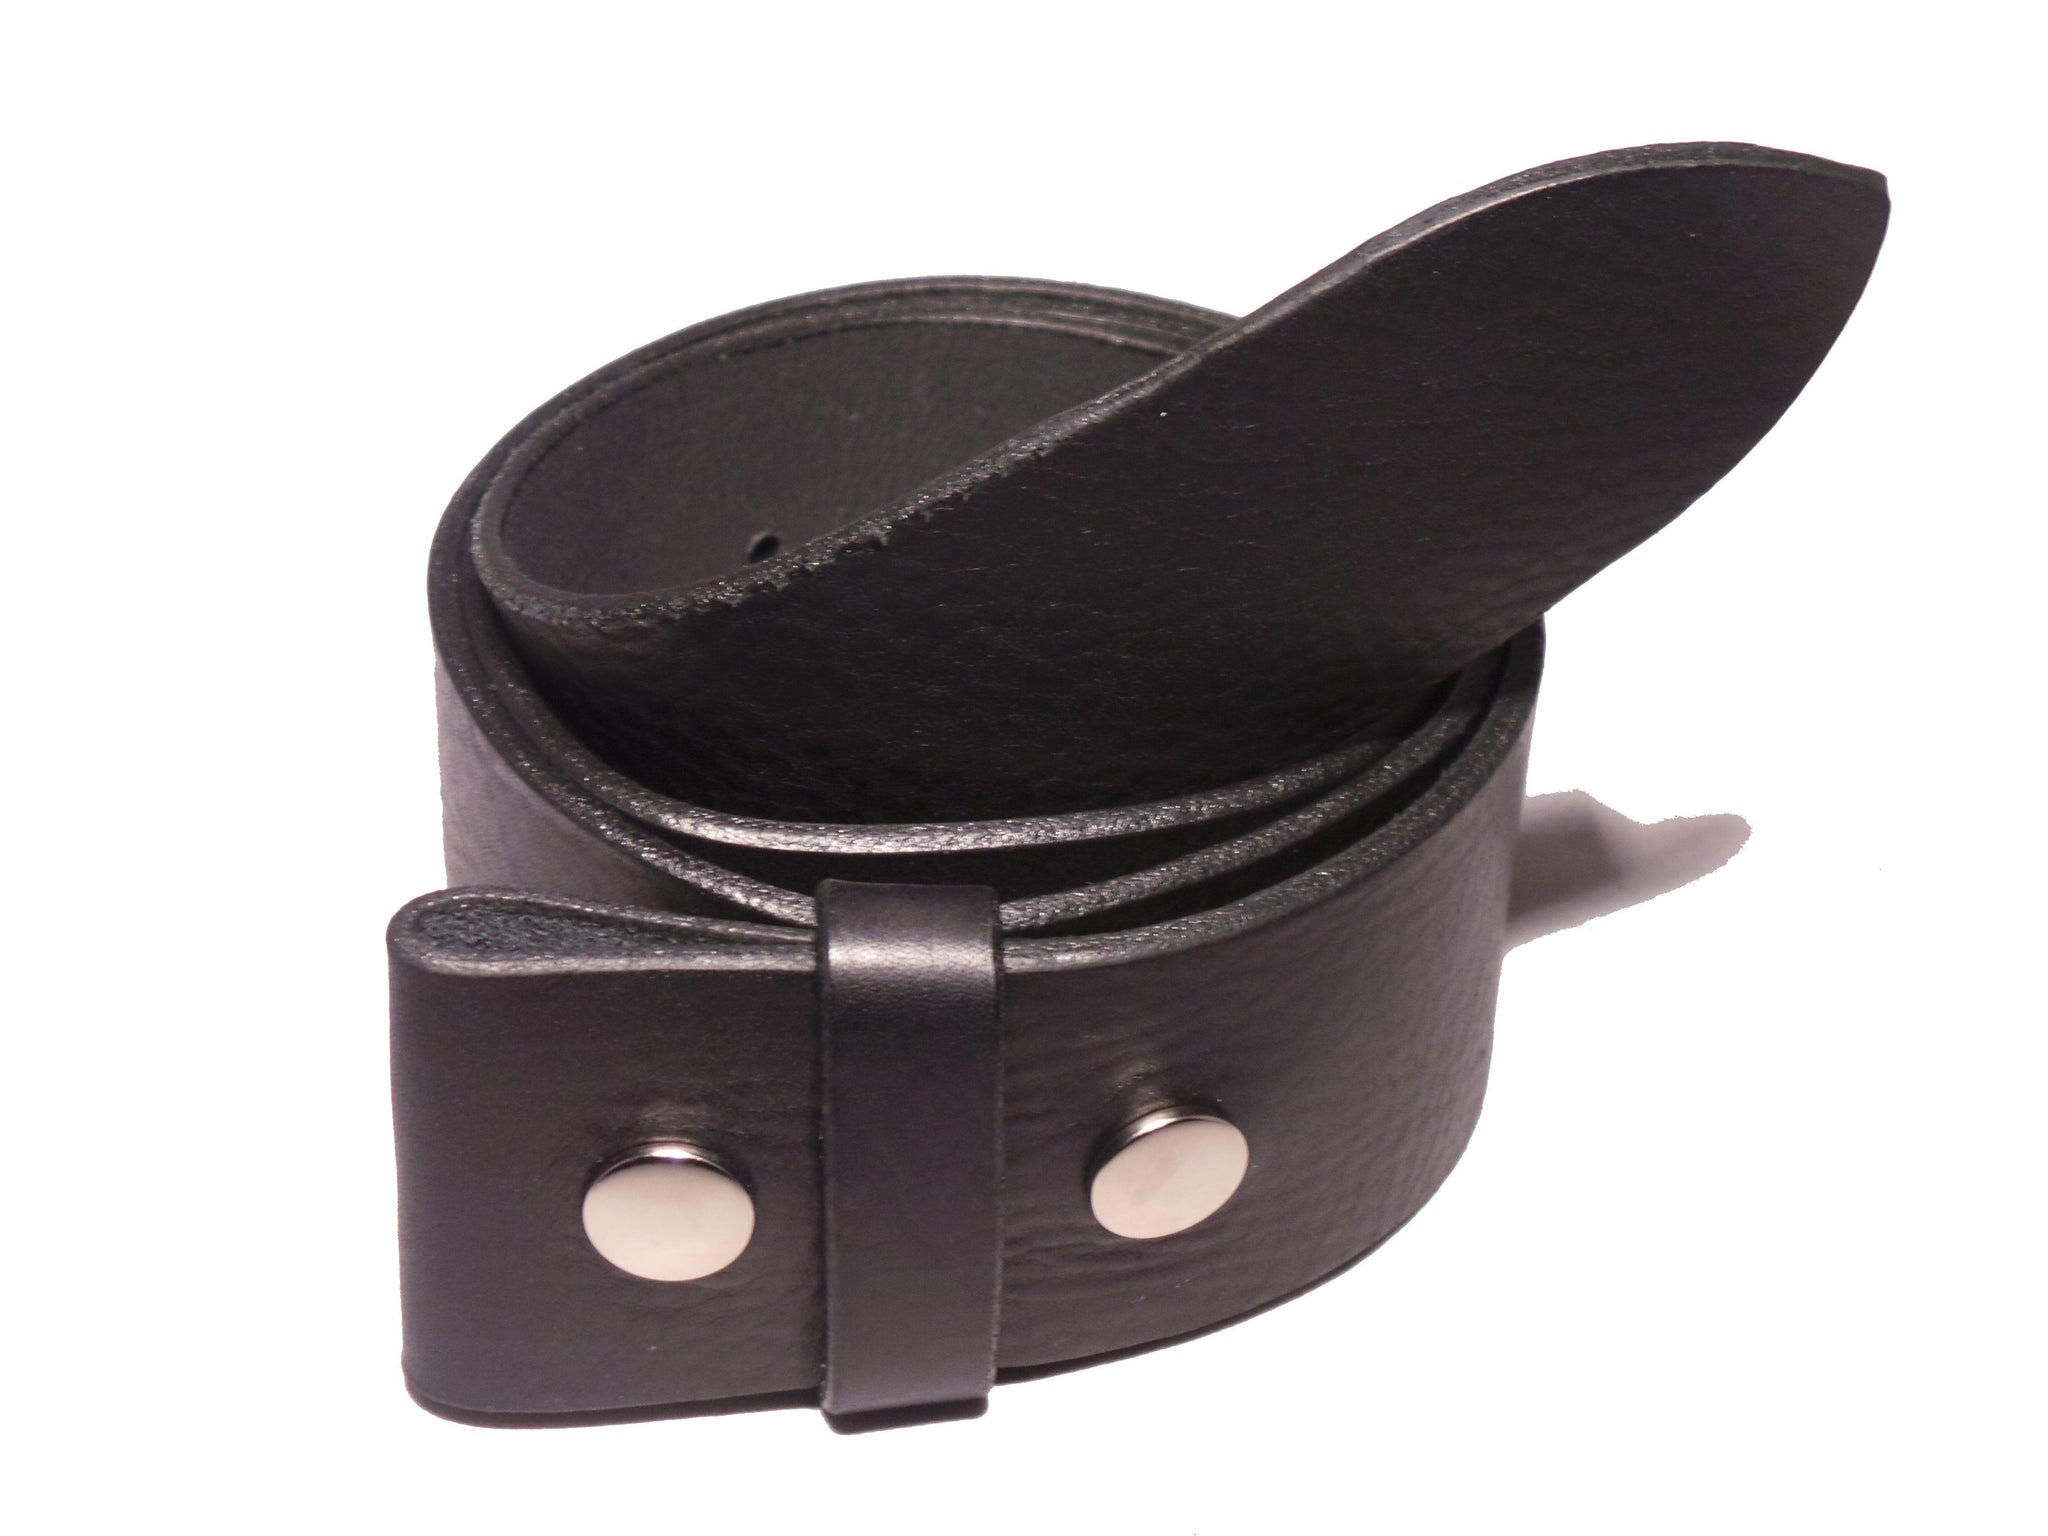 Original Club Replacement Top Handle and Leather Short Strap in